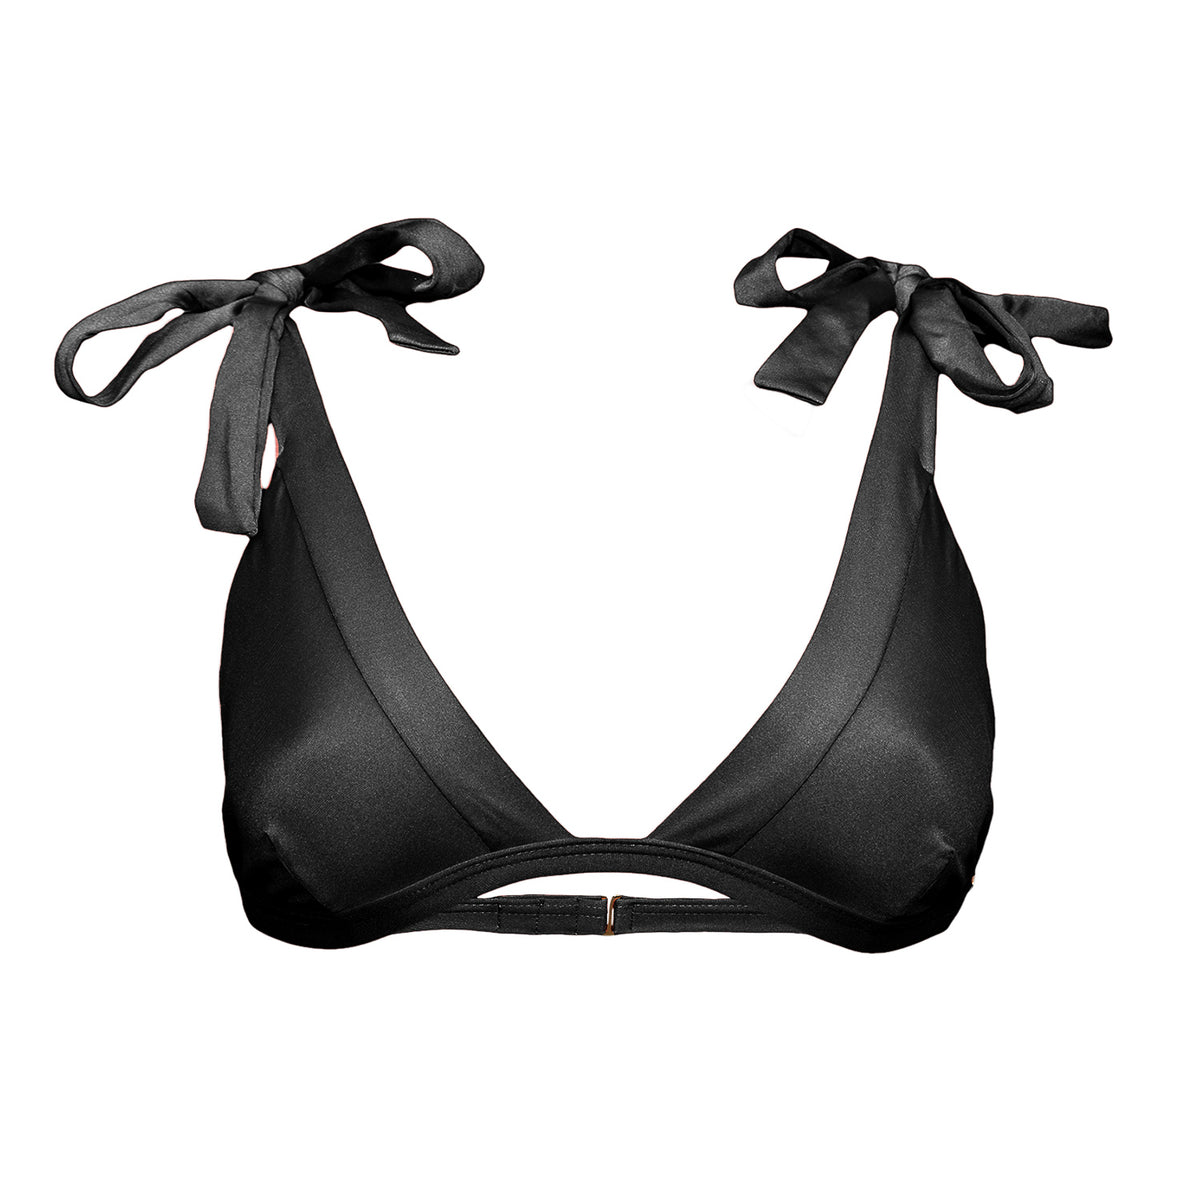 Bralette bikini top with bows on shoulders with an extra soft touch, fine lining and thick feel. Made sustainably and ethically in Europe from finest polyamide. Perfected fit for every body shape.